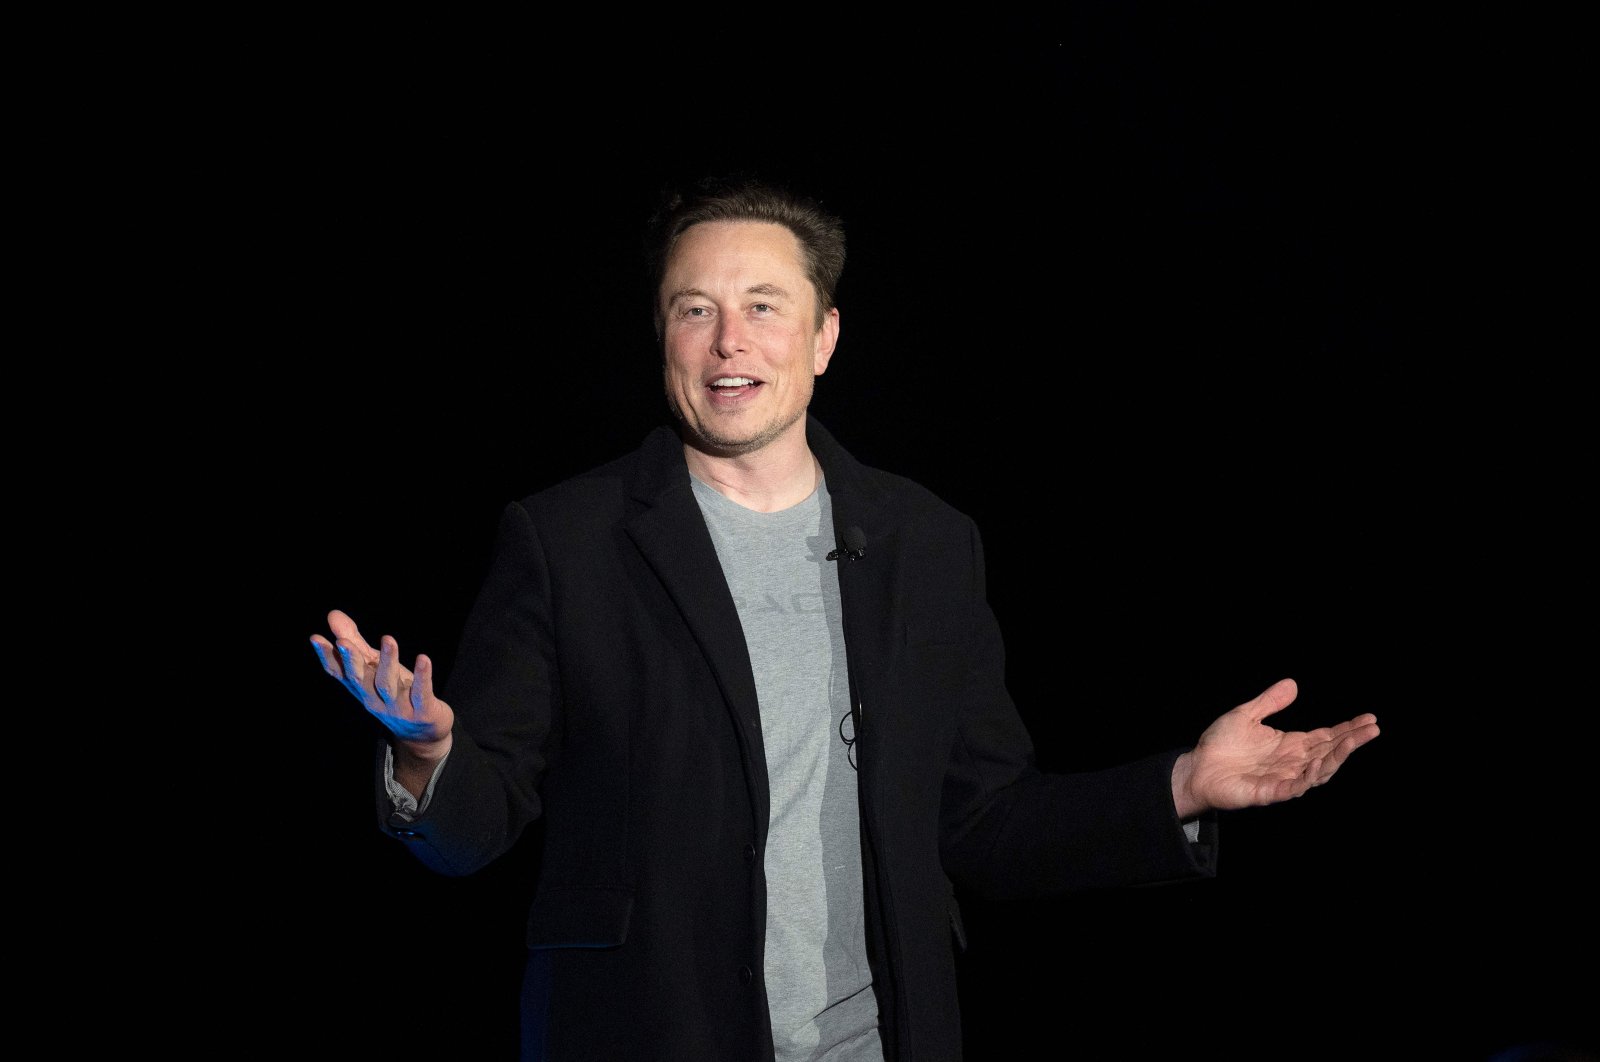 Elon Musk gestures as he speaks during a press conference, Boca Chica Village, Texas, U.S., Feb. 10, 2022. (AFP Photo)